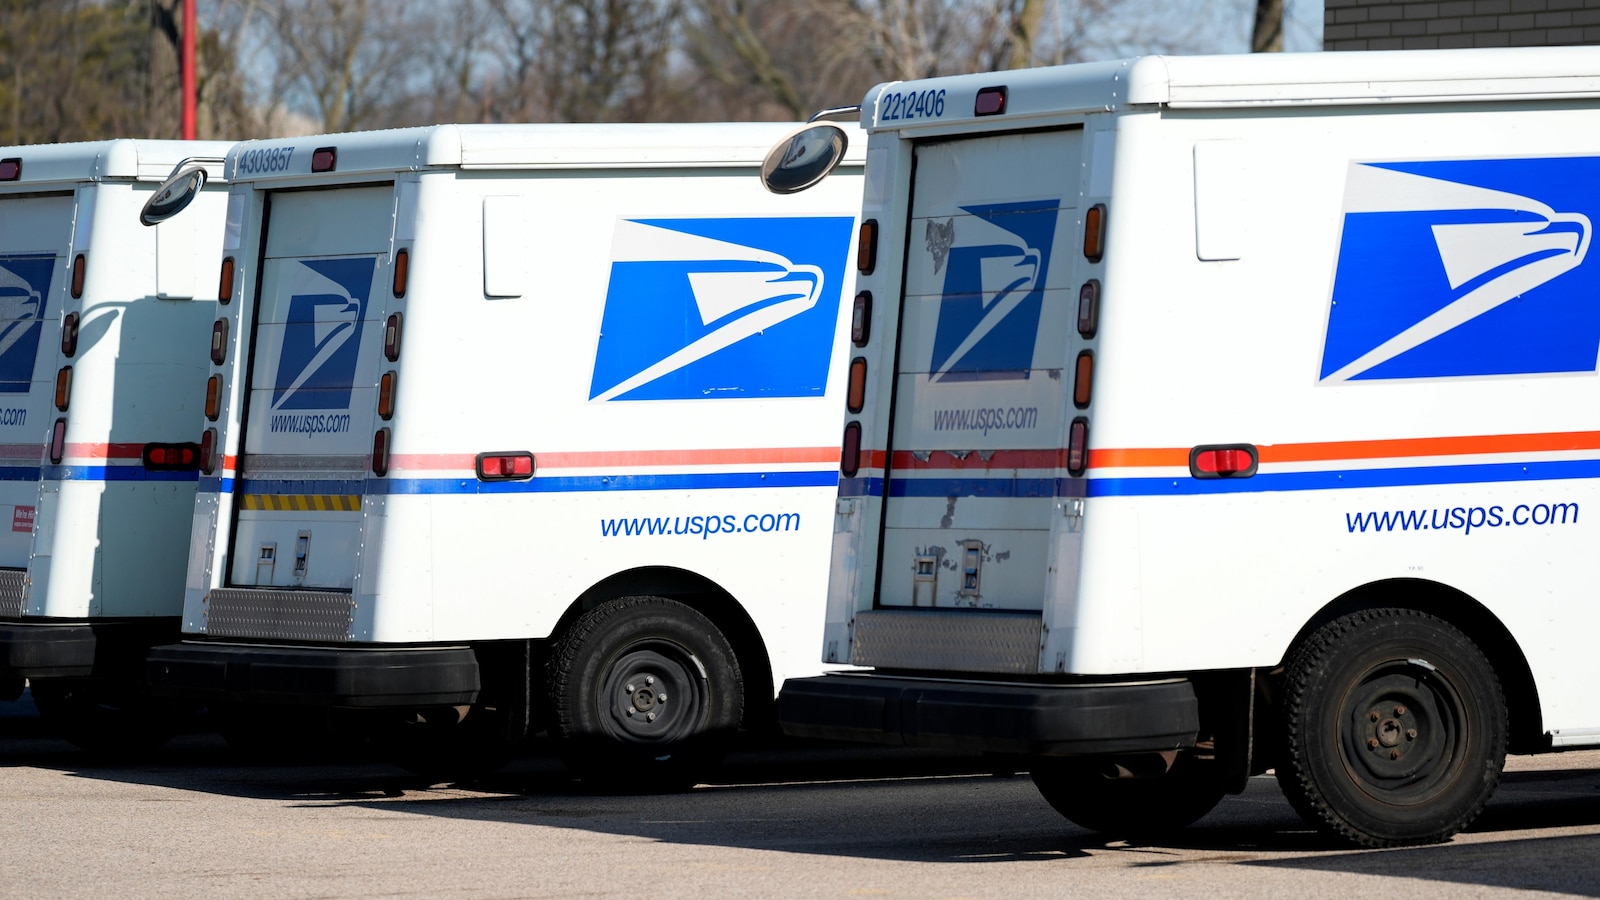 Efforts to Address Ongoing Letter Carrier Robberies by USPS, Union, and Lawmakers